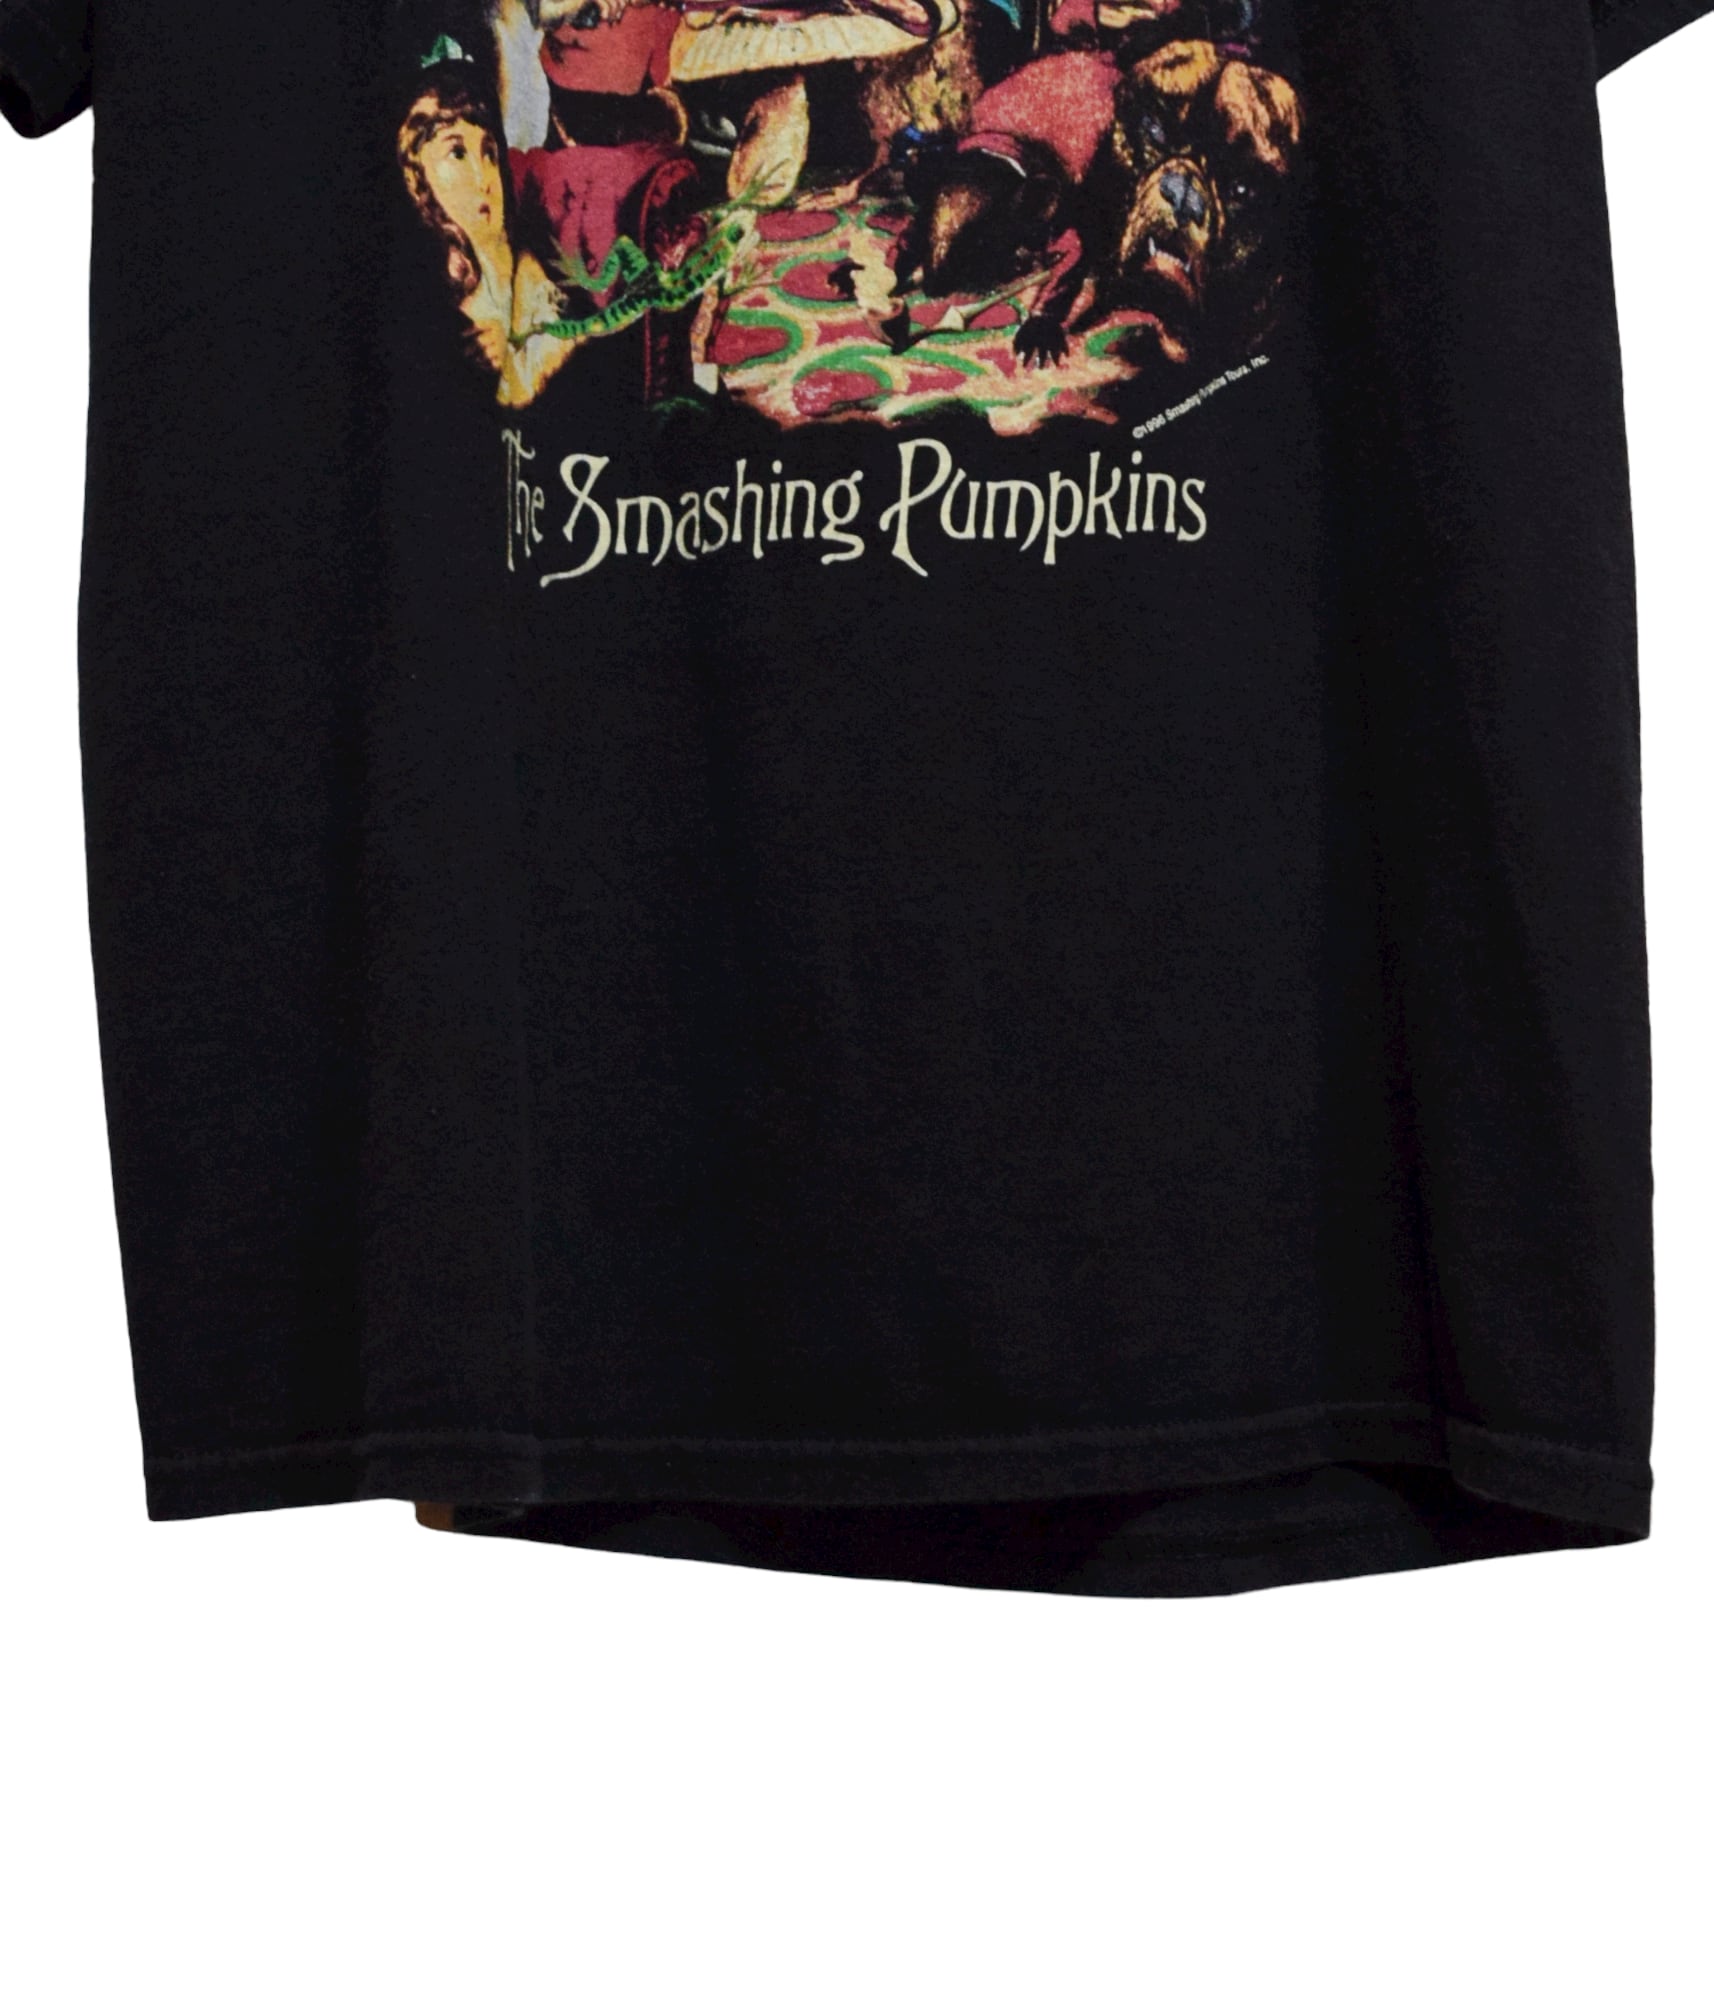 Vintage 90s XL Rock band T-shirt -The Smashing Pumpkins- | BEGGARS  BANQUET公式通販サイト　古着・ヴィンテージ